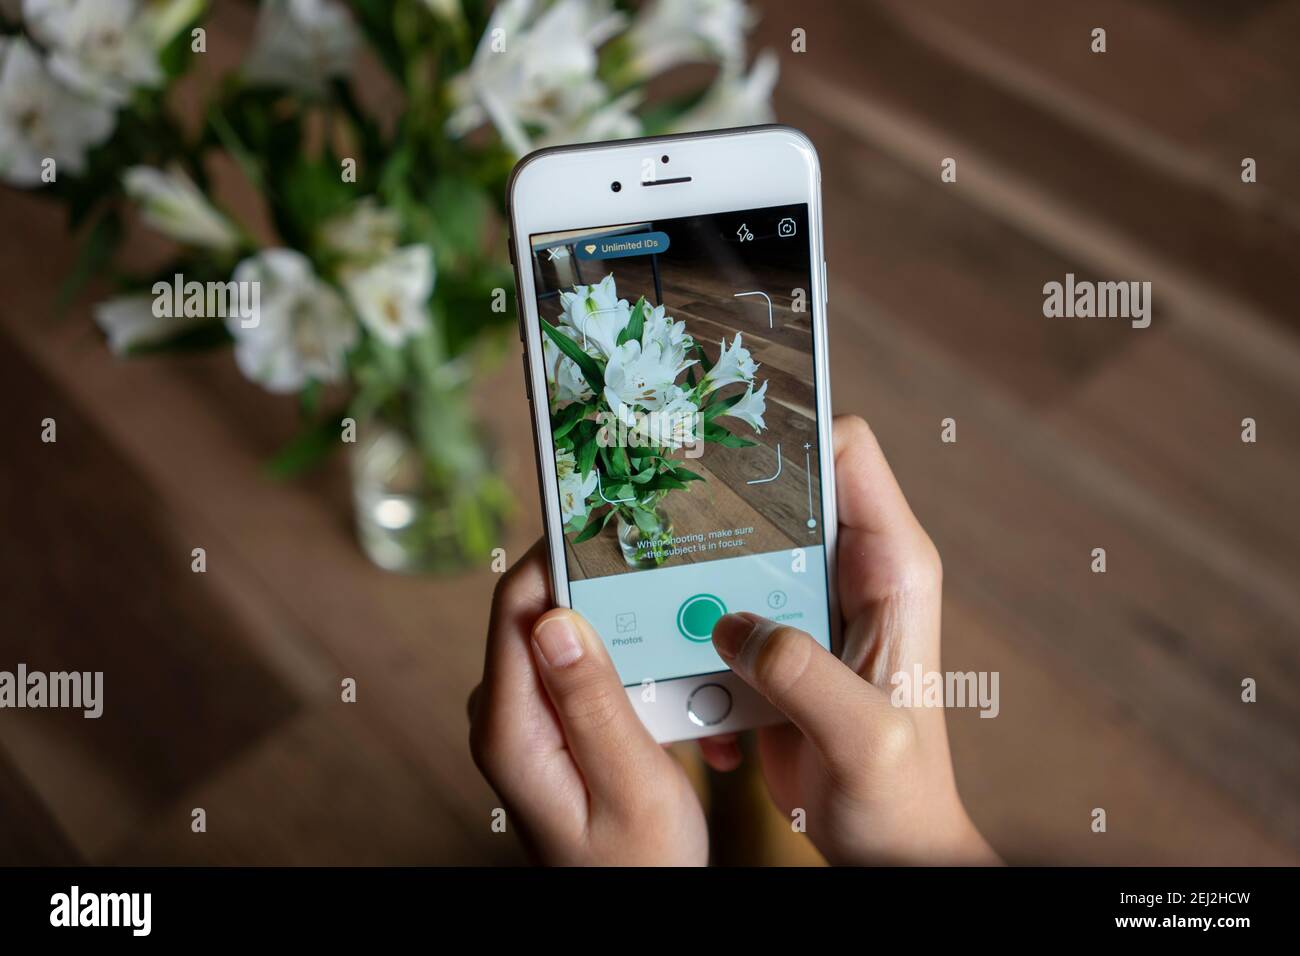 A girl uses the PictureThis app on an iPhone to identify a flower by taking a photo. The flower in the picture is Peruvian lily (lily of the Incas). Stock Photo